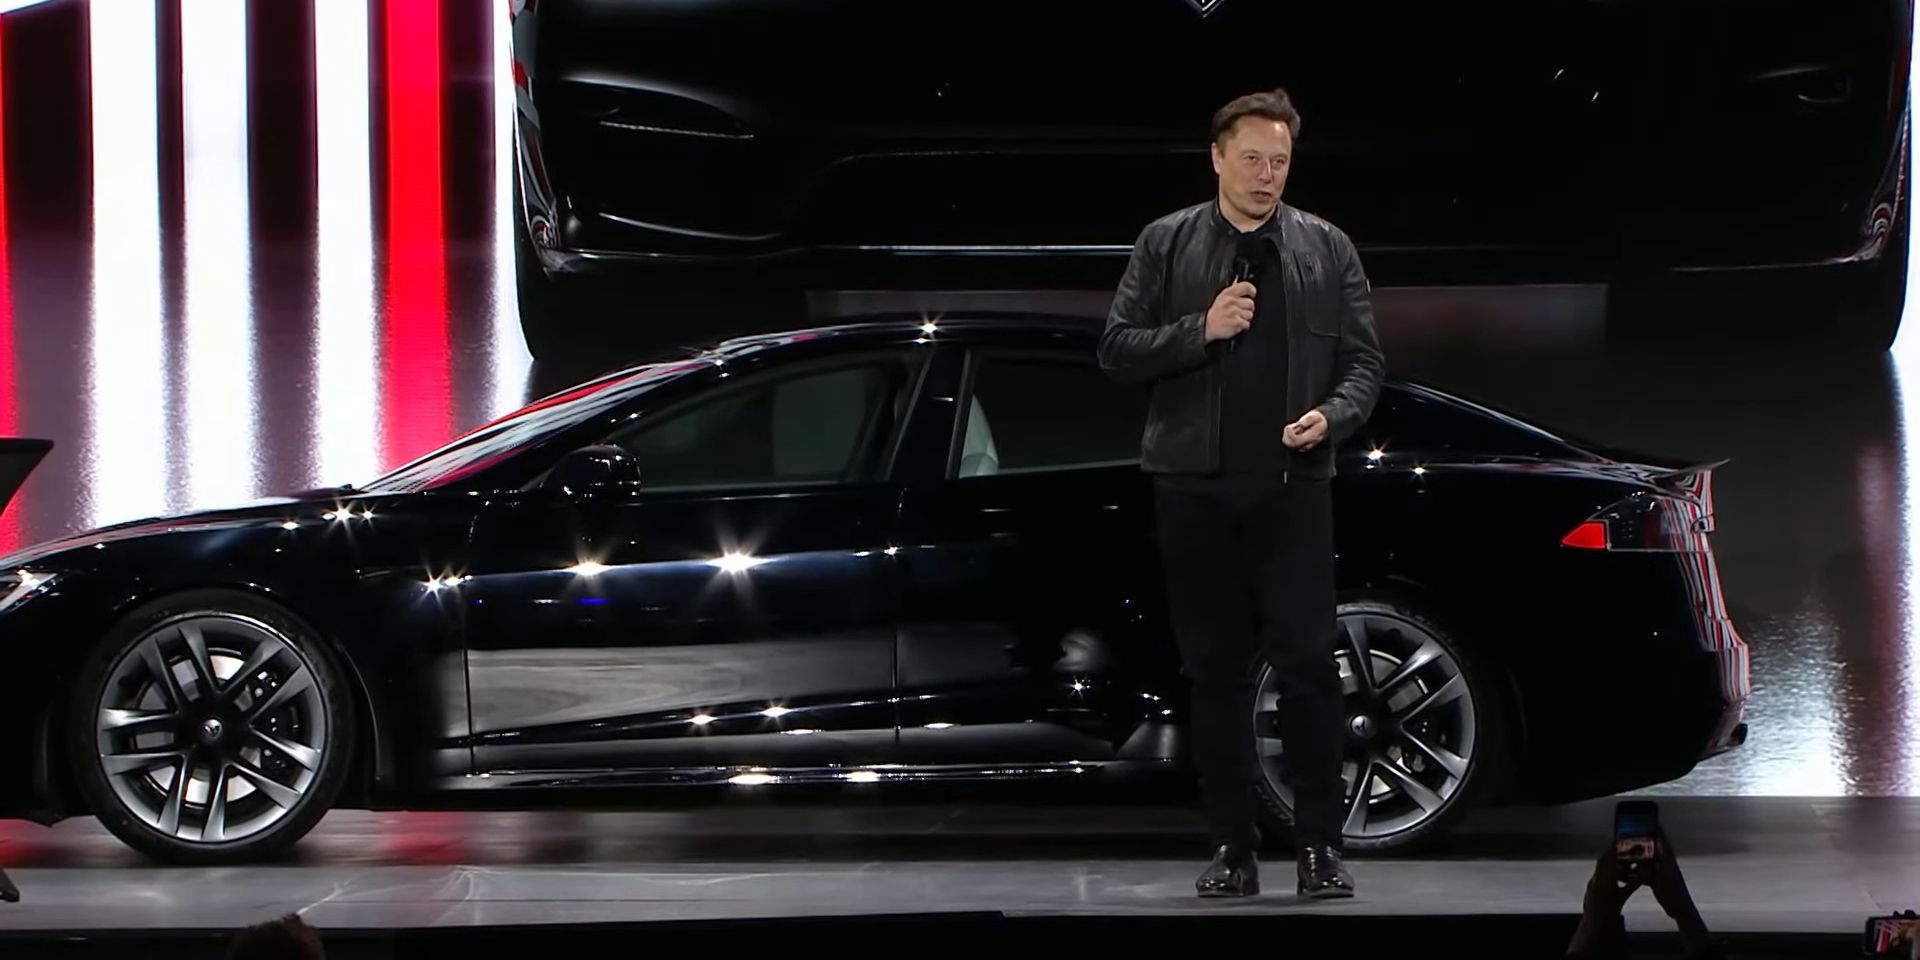 Elon Musk presenting at Model S Plaid delivery event